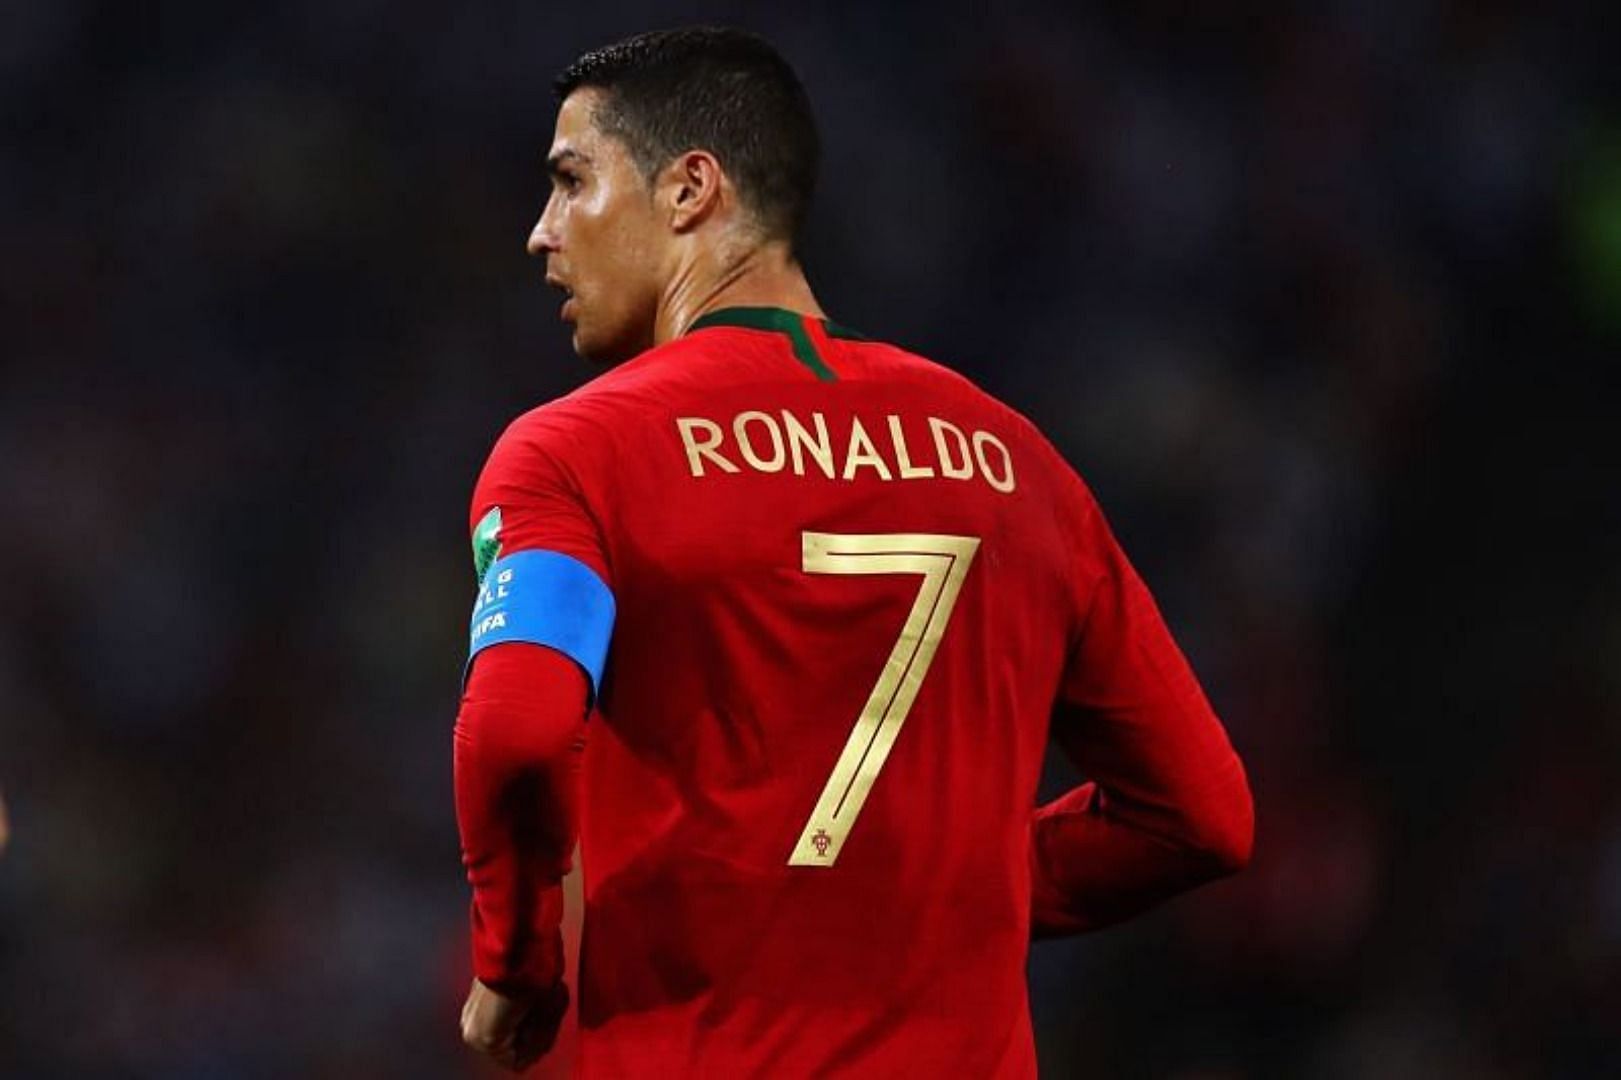 ronaldo all jersey numbers